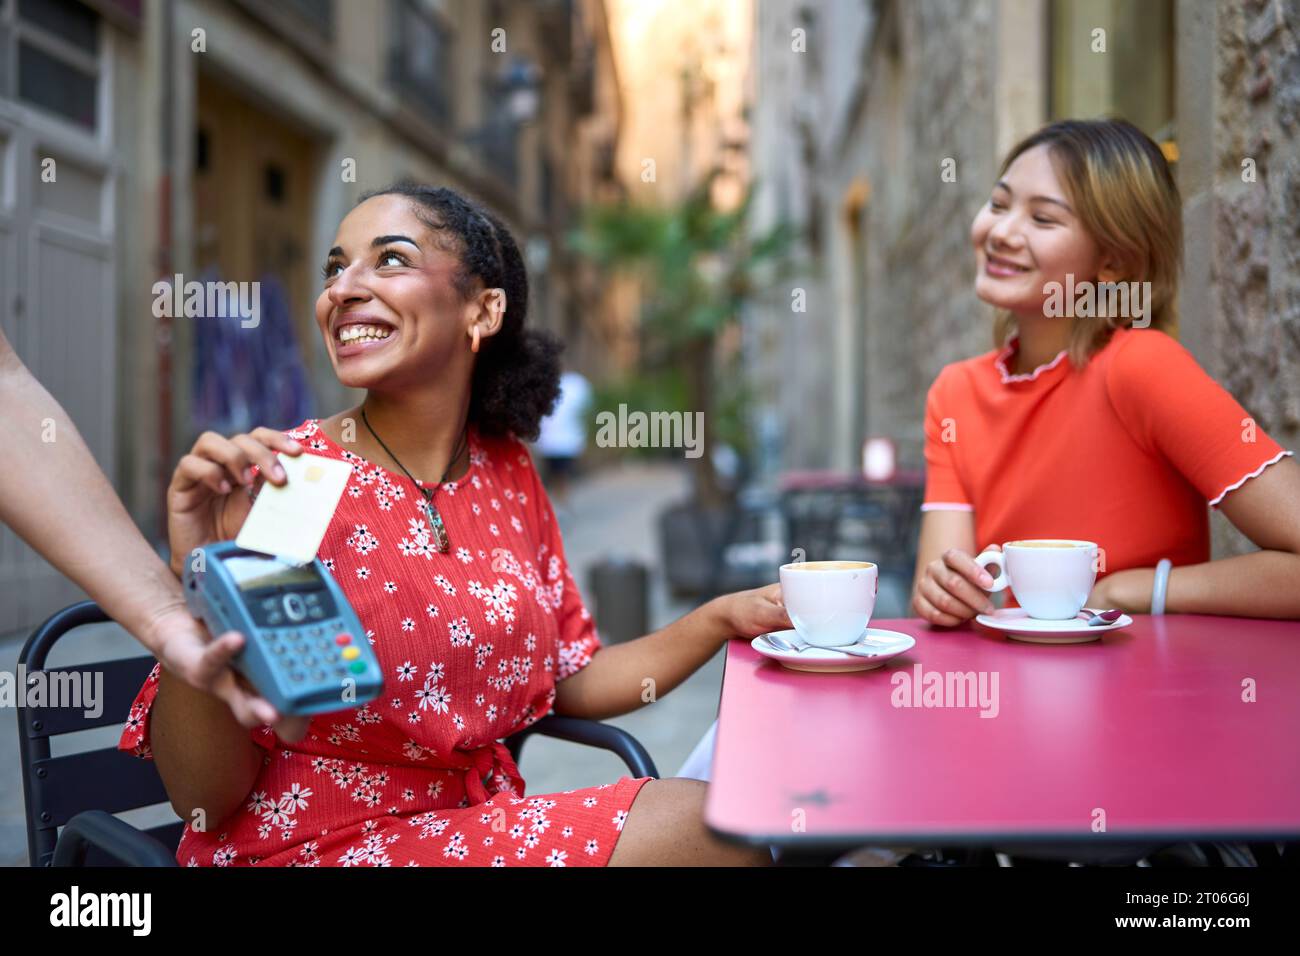 Friends paying with credit card sitting in a cafeteria Stock Photo